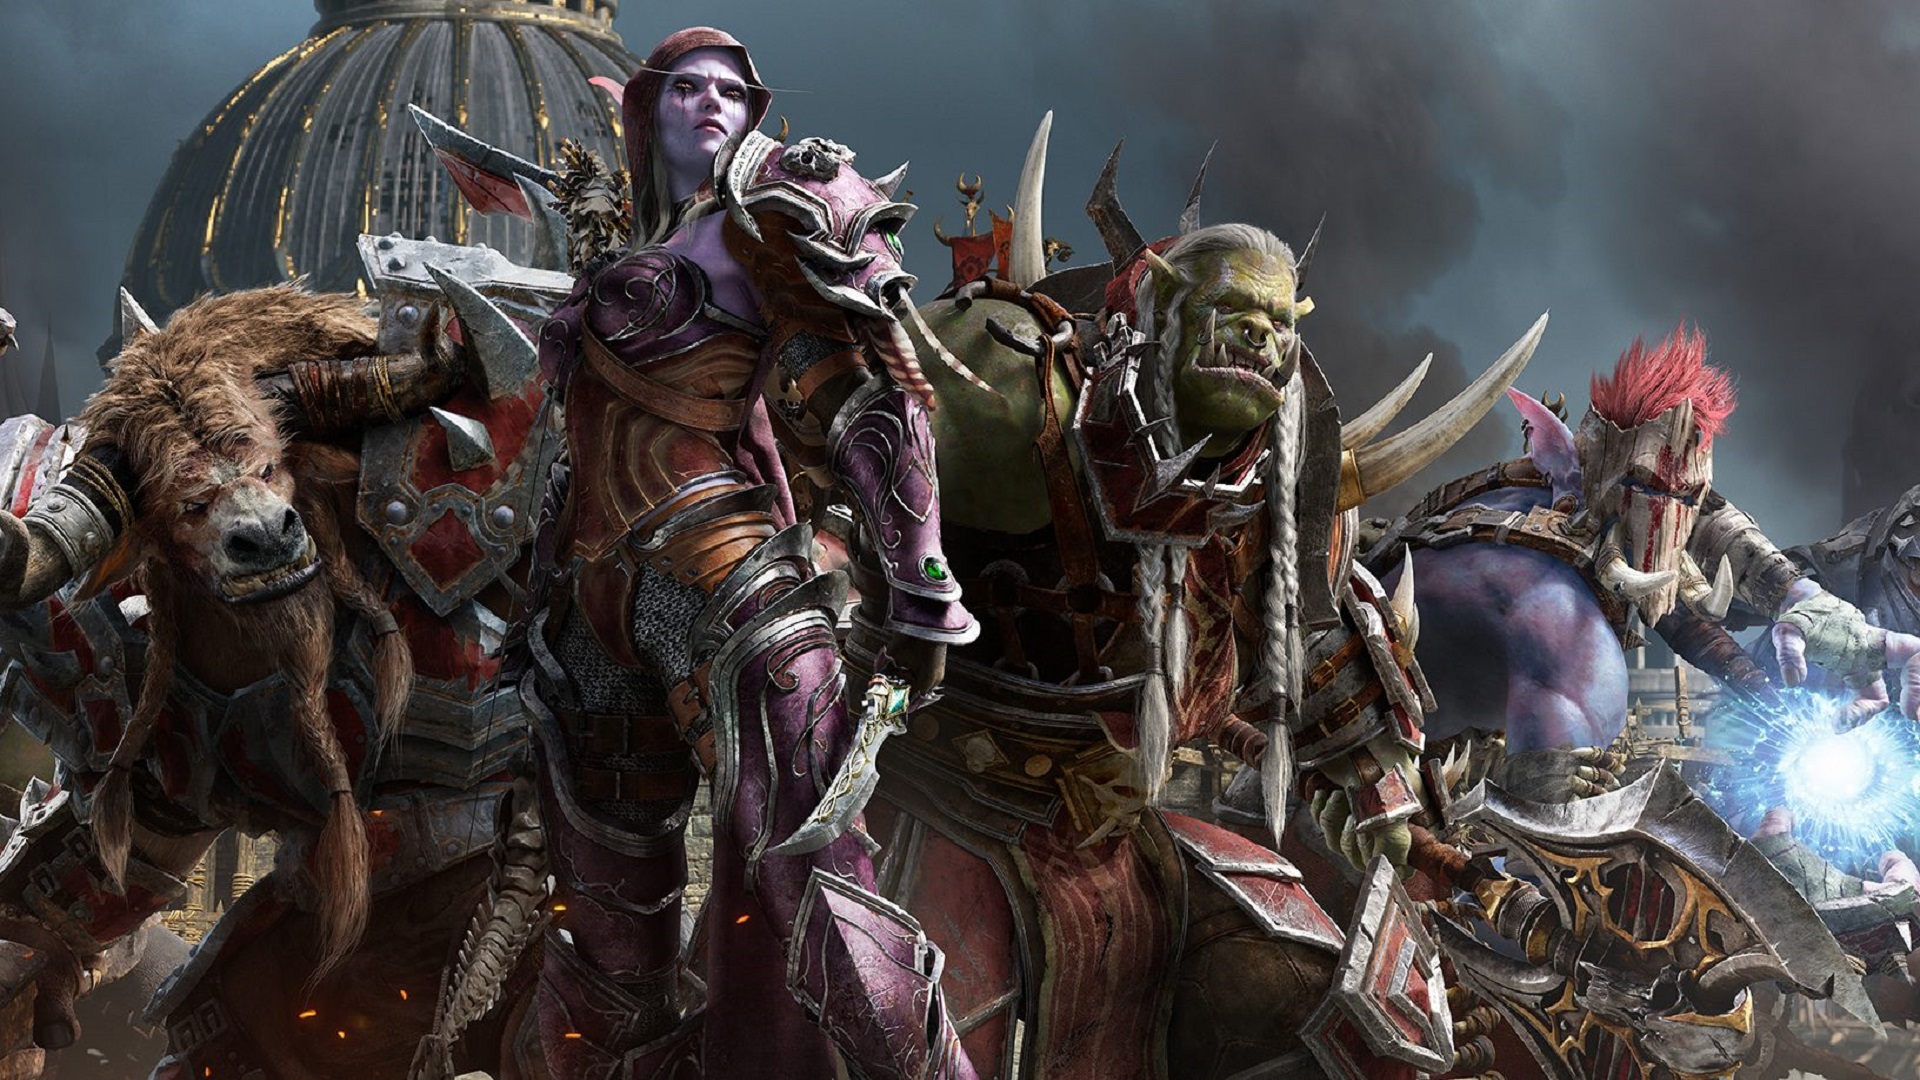 The best World of Warcraft concept art from this amazing game